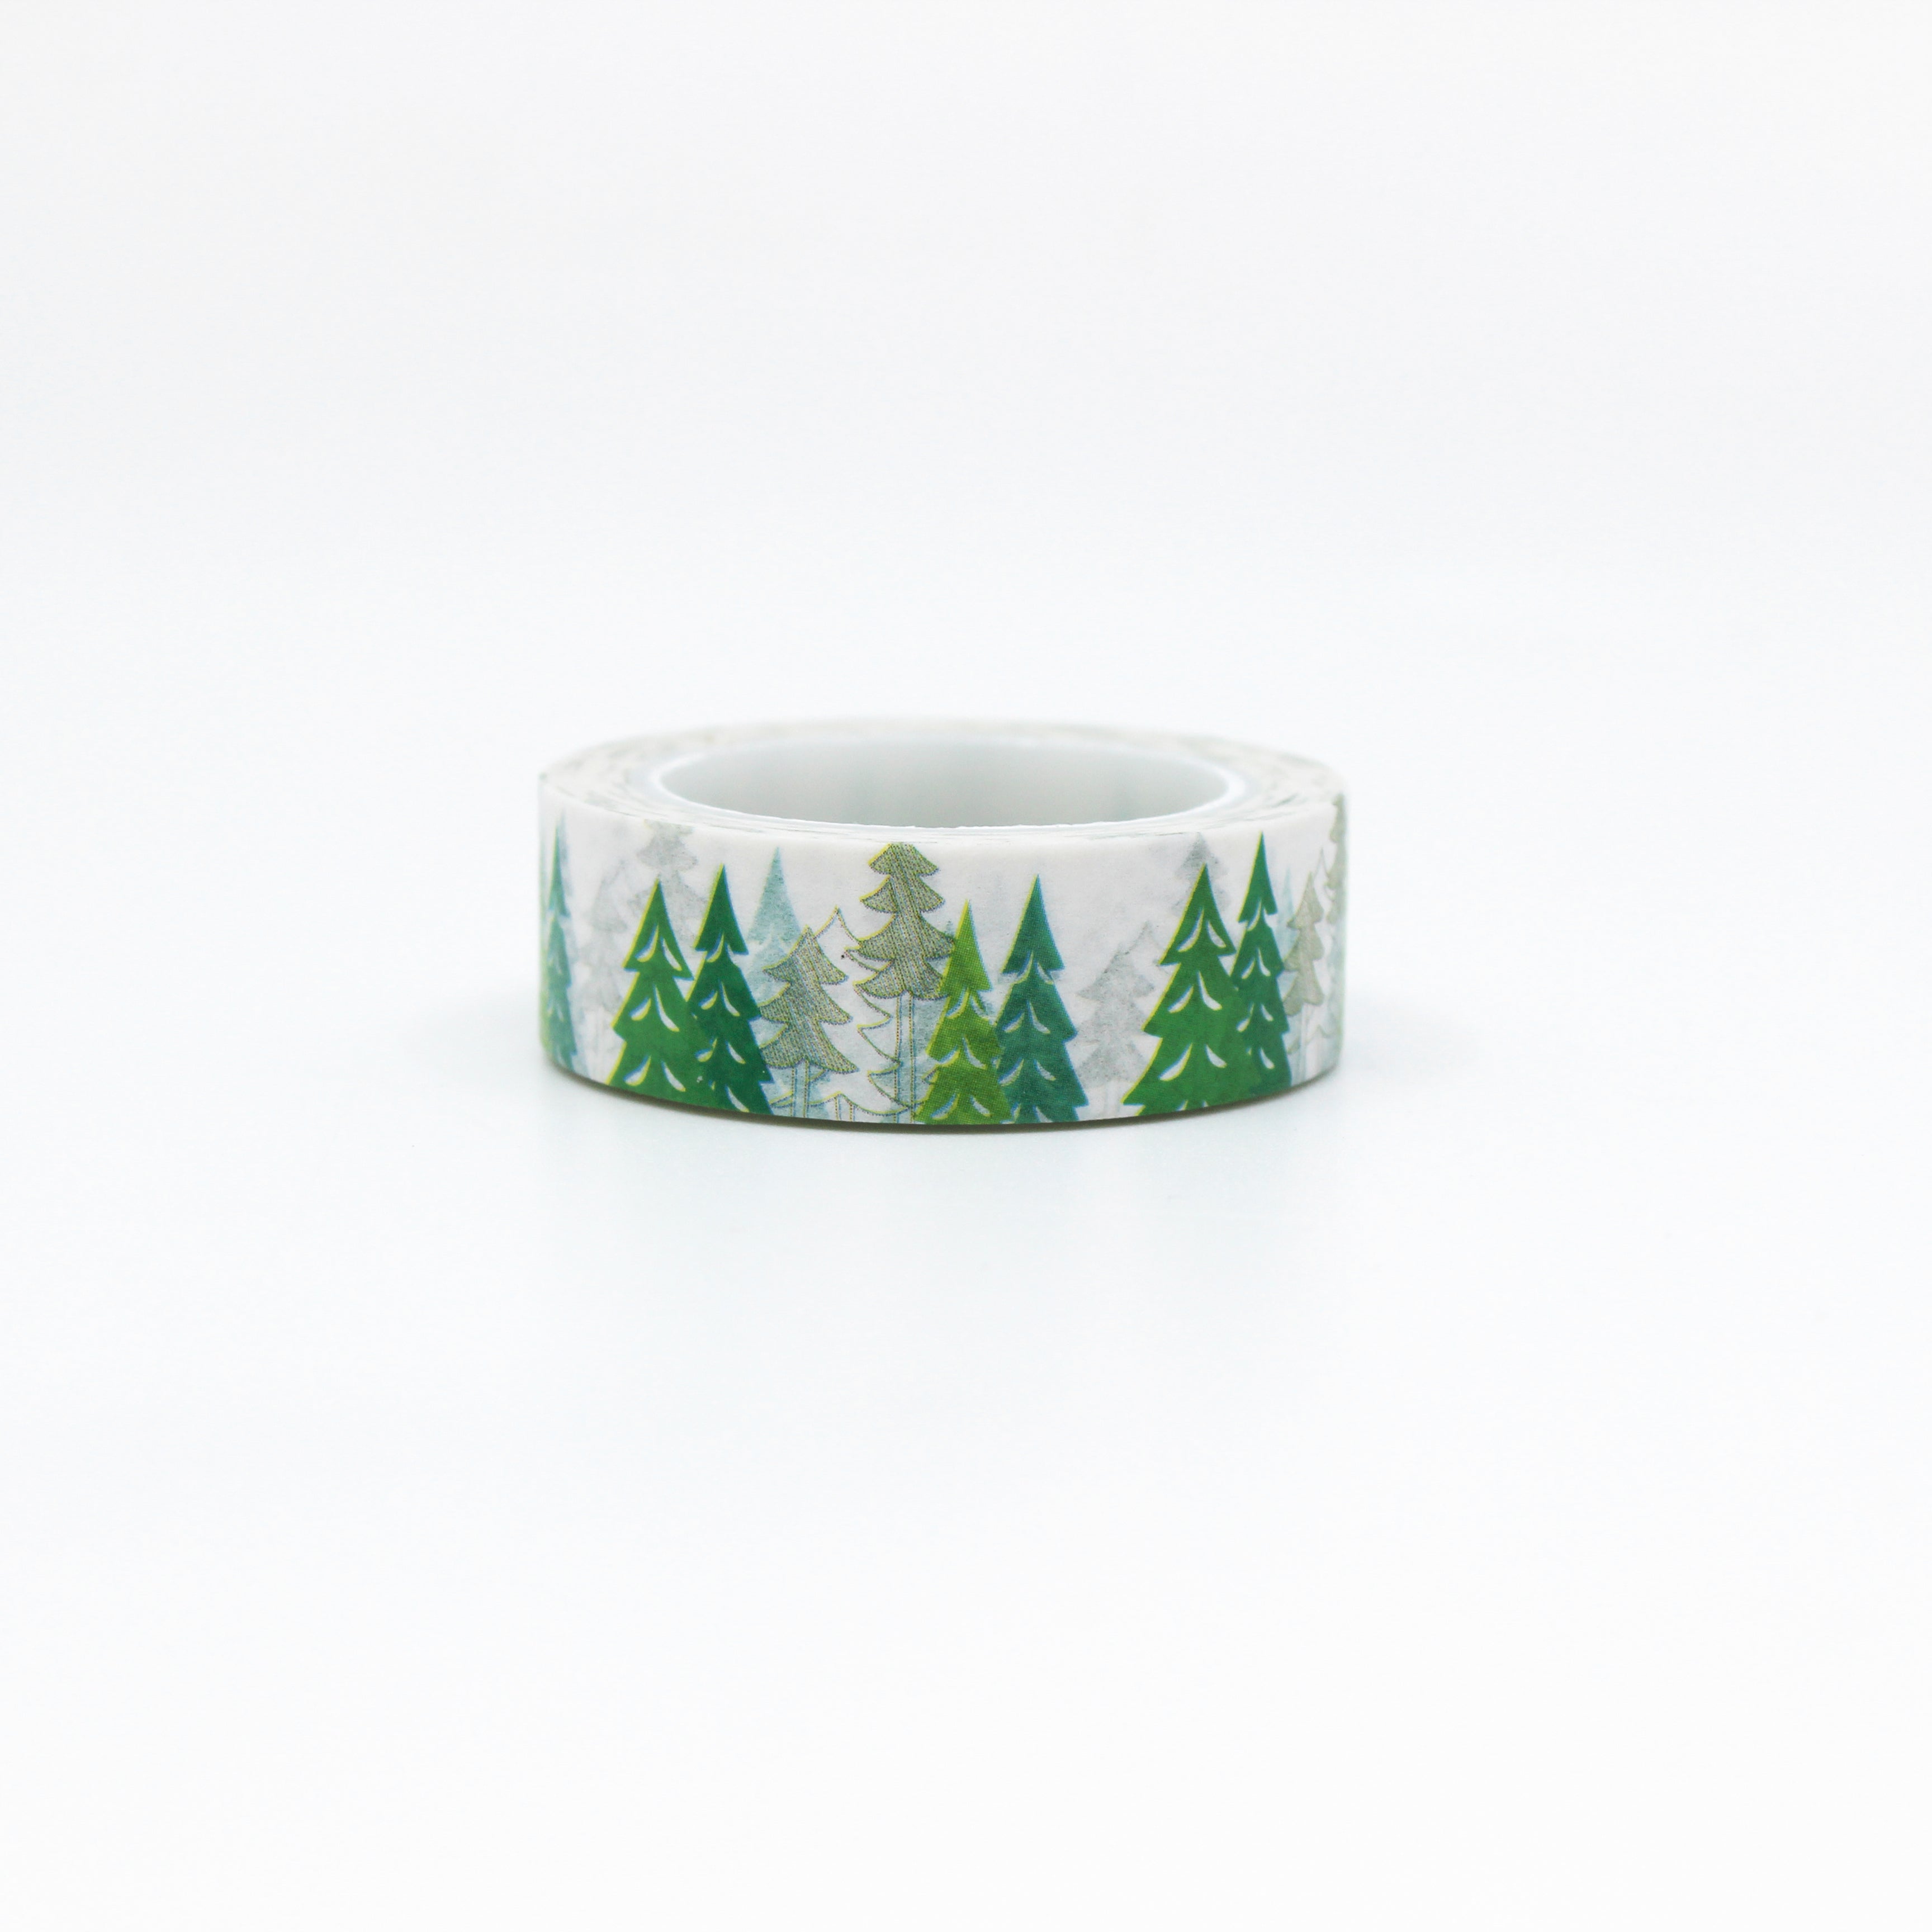 This is a green Christmas tree washi tape from BBB Supplies Craft Shop